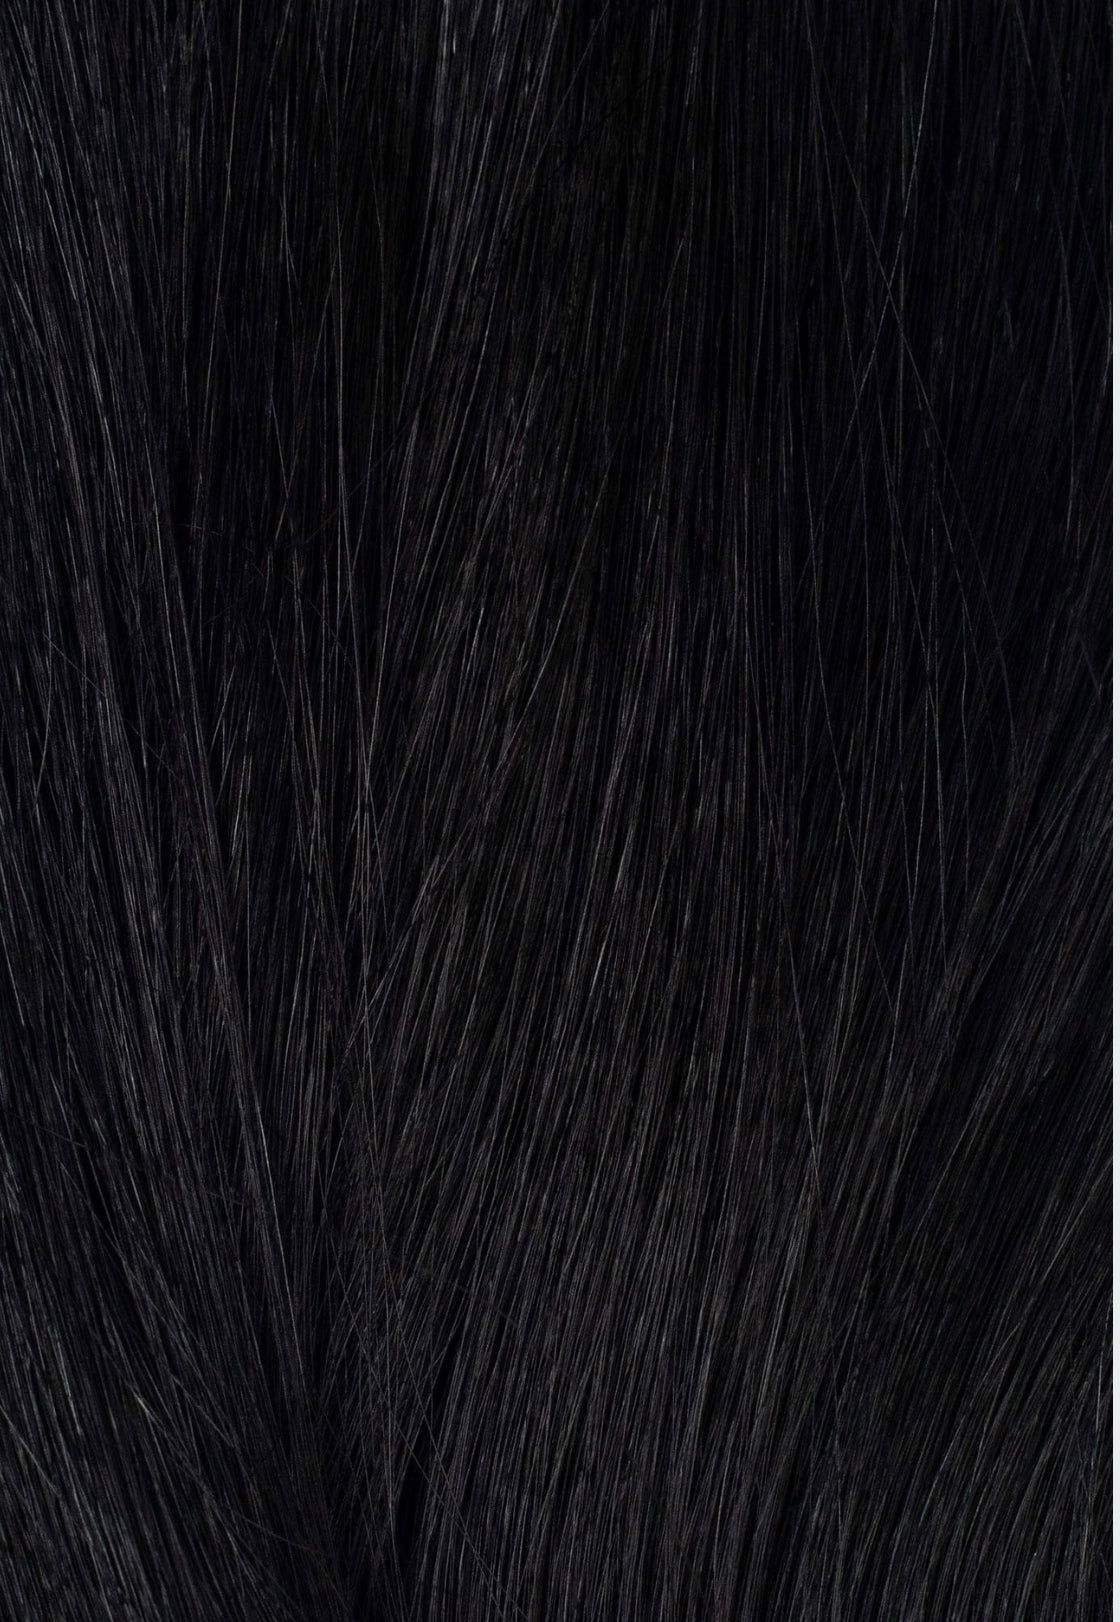 Remy Handtied Weft Hair Extensions (straight + curly)